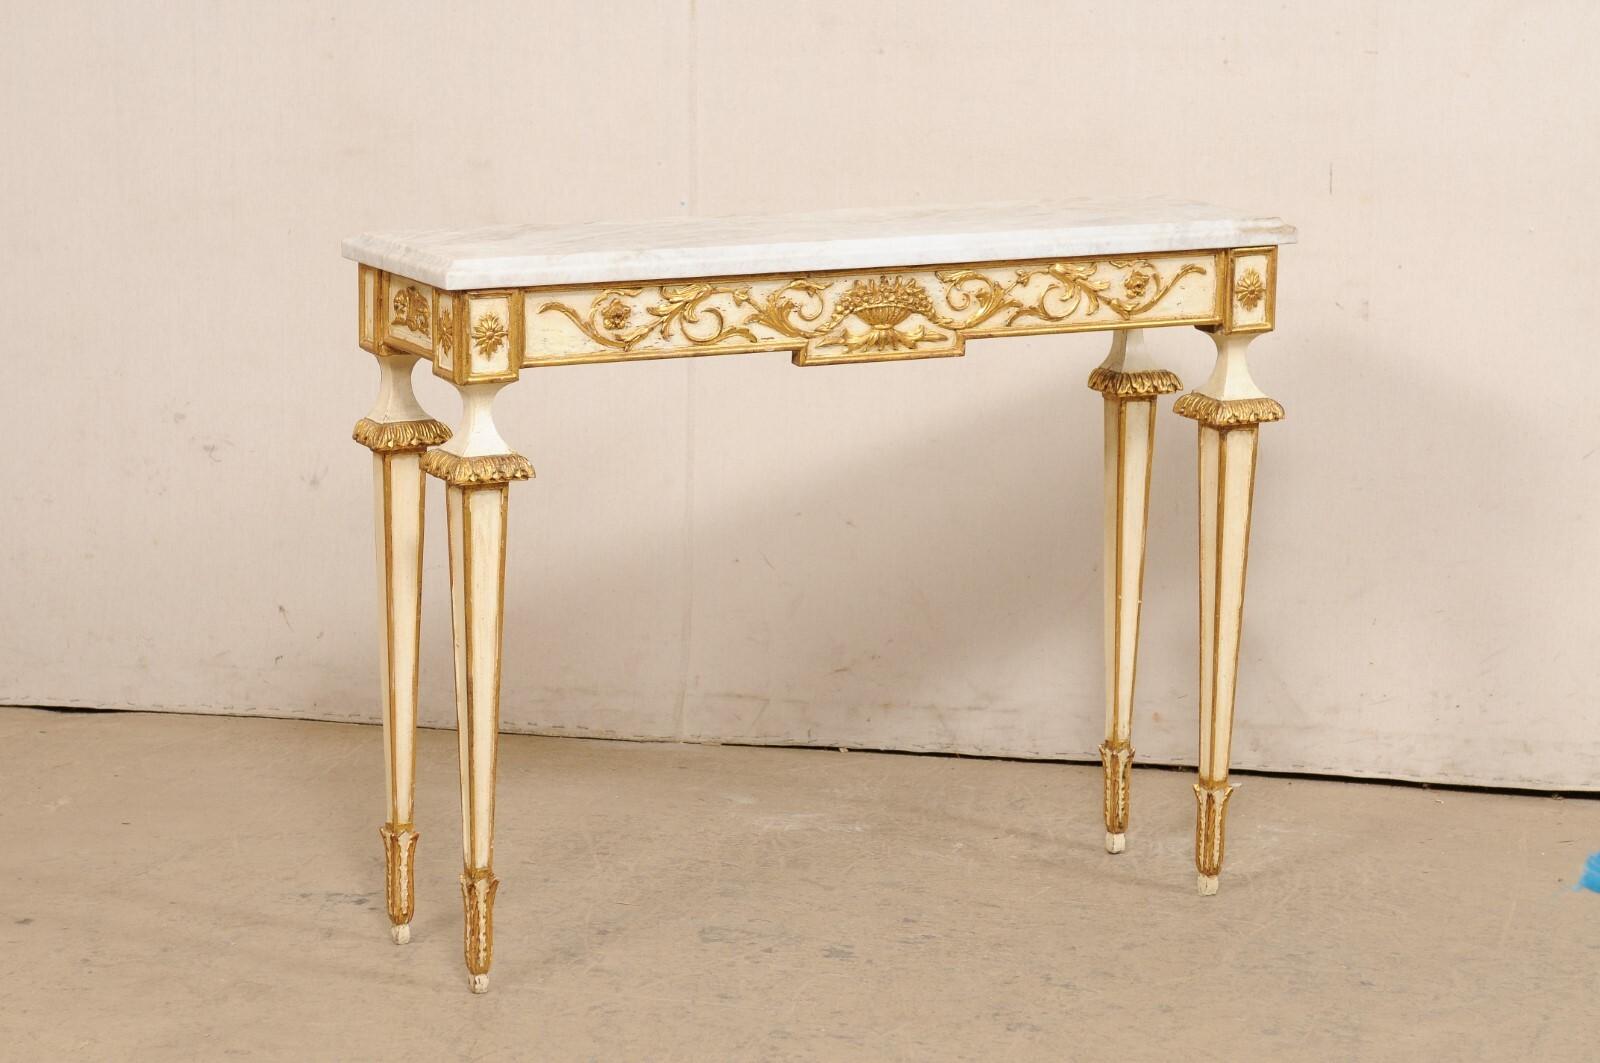 An Italian slender console table with new stone top. This vintage table from Italy has a new rectangular-shaped quartzite top with beveled edges, atop an apron which is embellished in a carved scrolling foliate motif, and flowers carved and framed